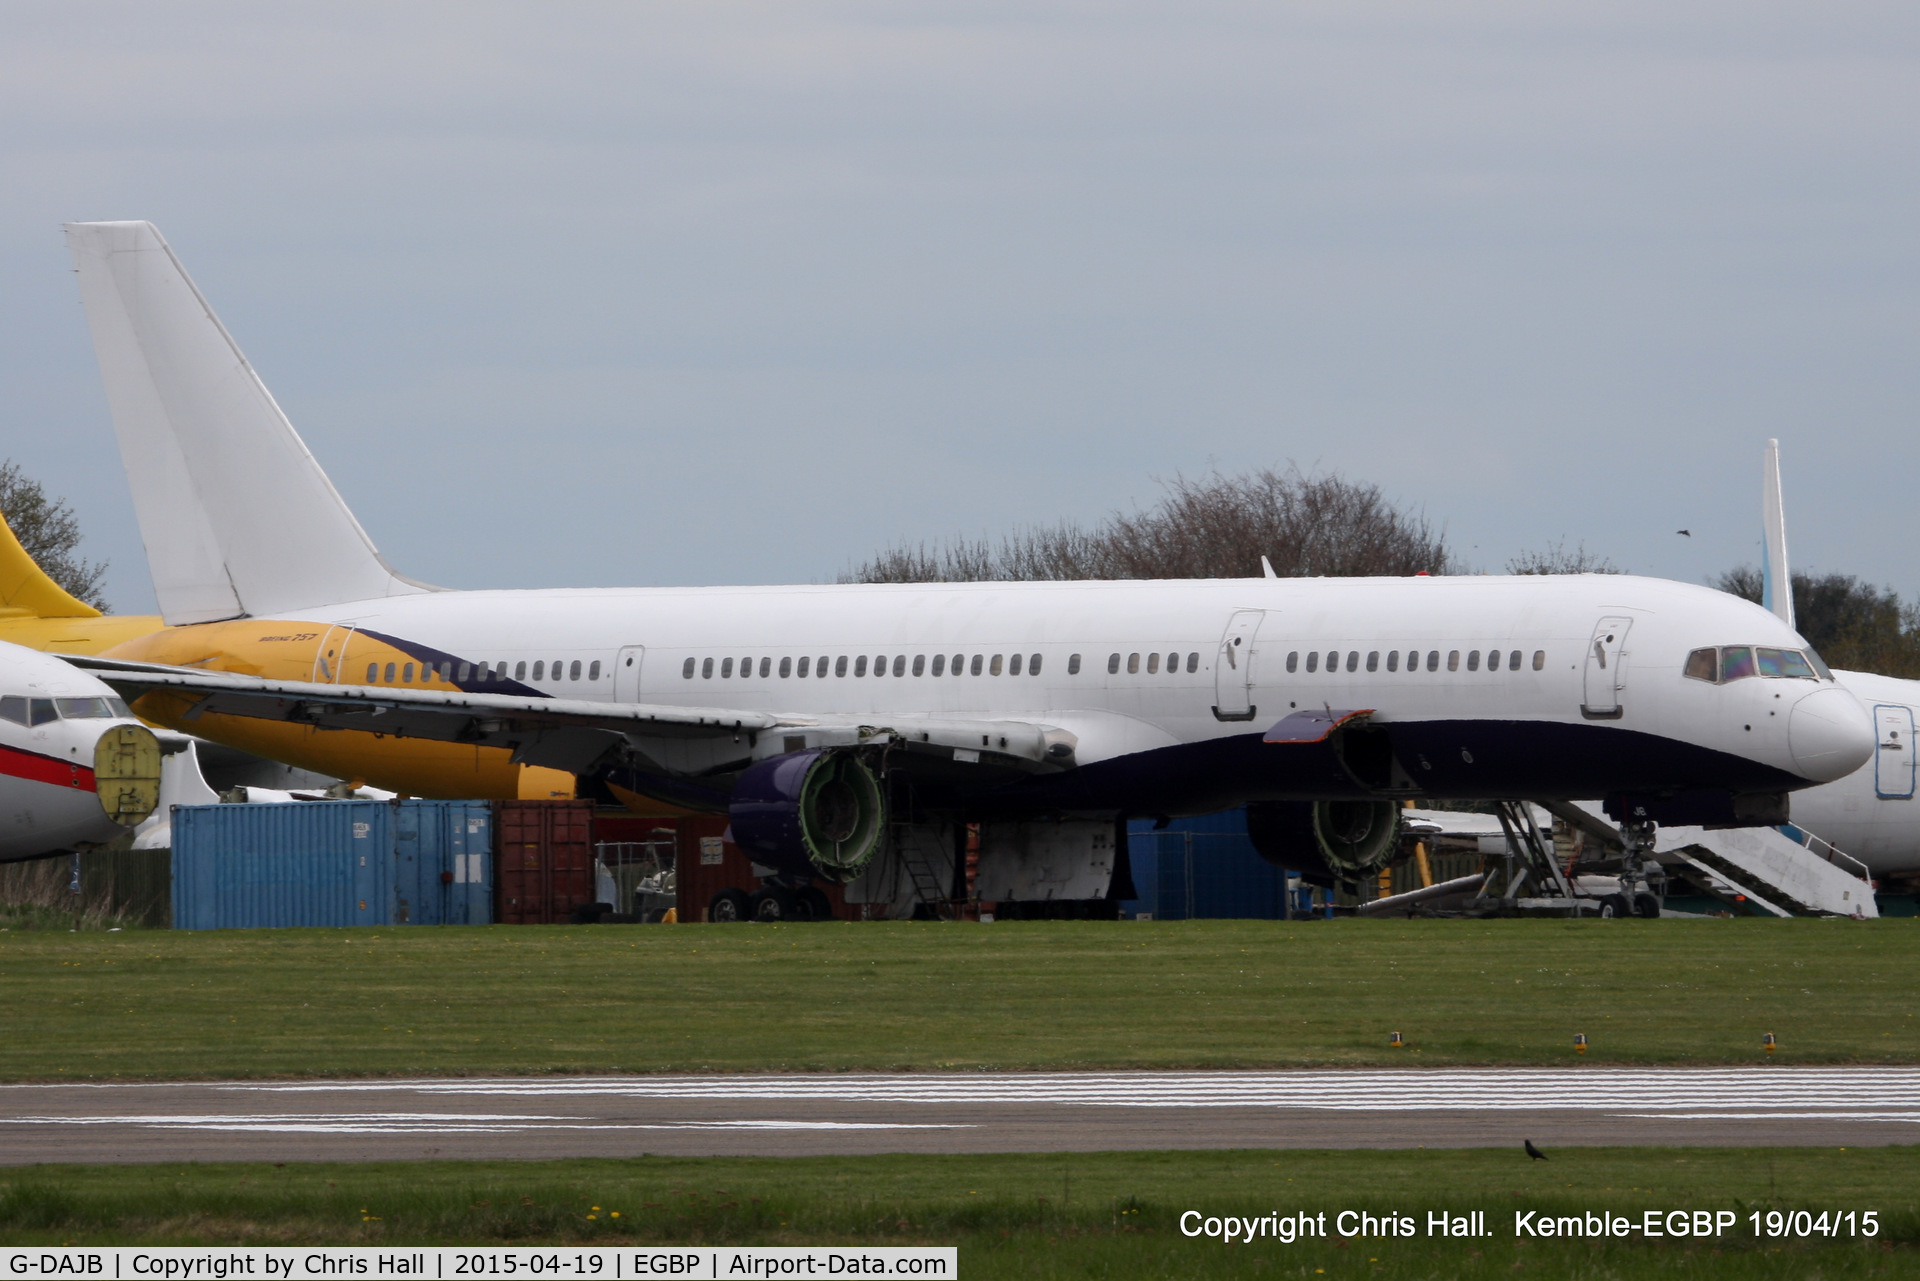 G-DAJB, 1987 Boeing 757-2T7 C/N 23770, ex Monarch, in the scrapping area at Kemble